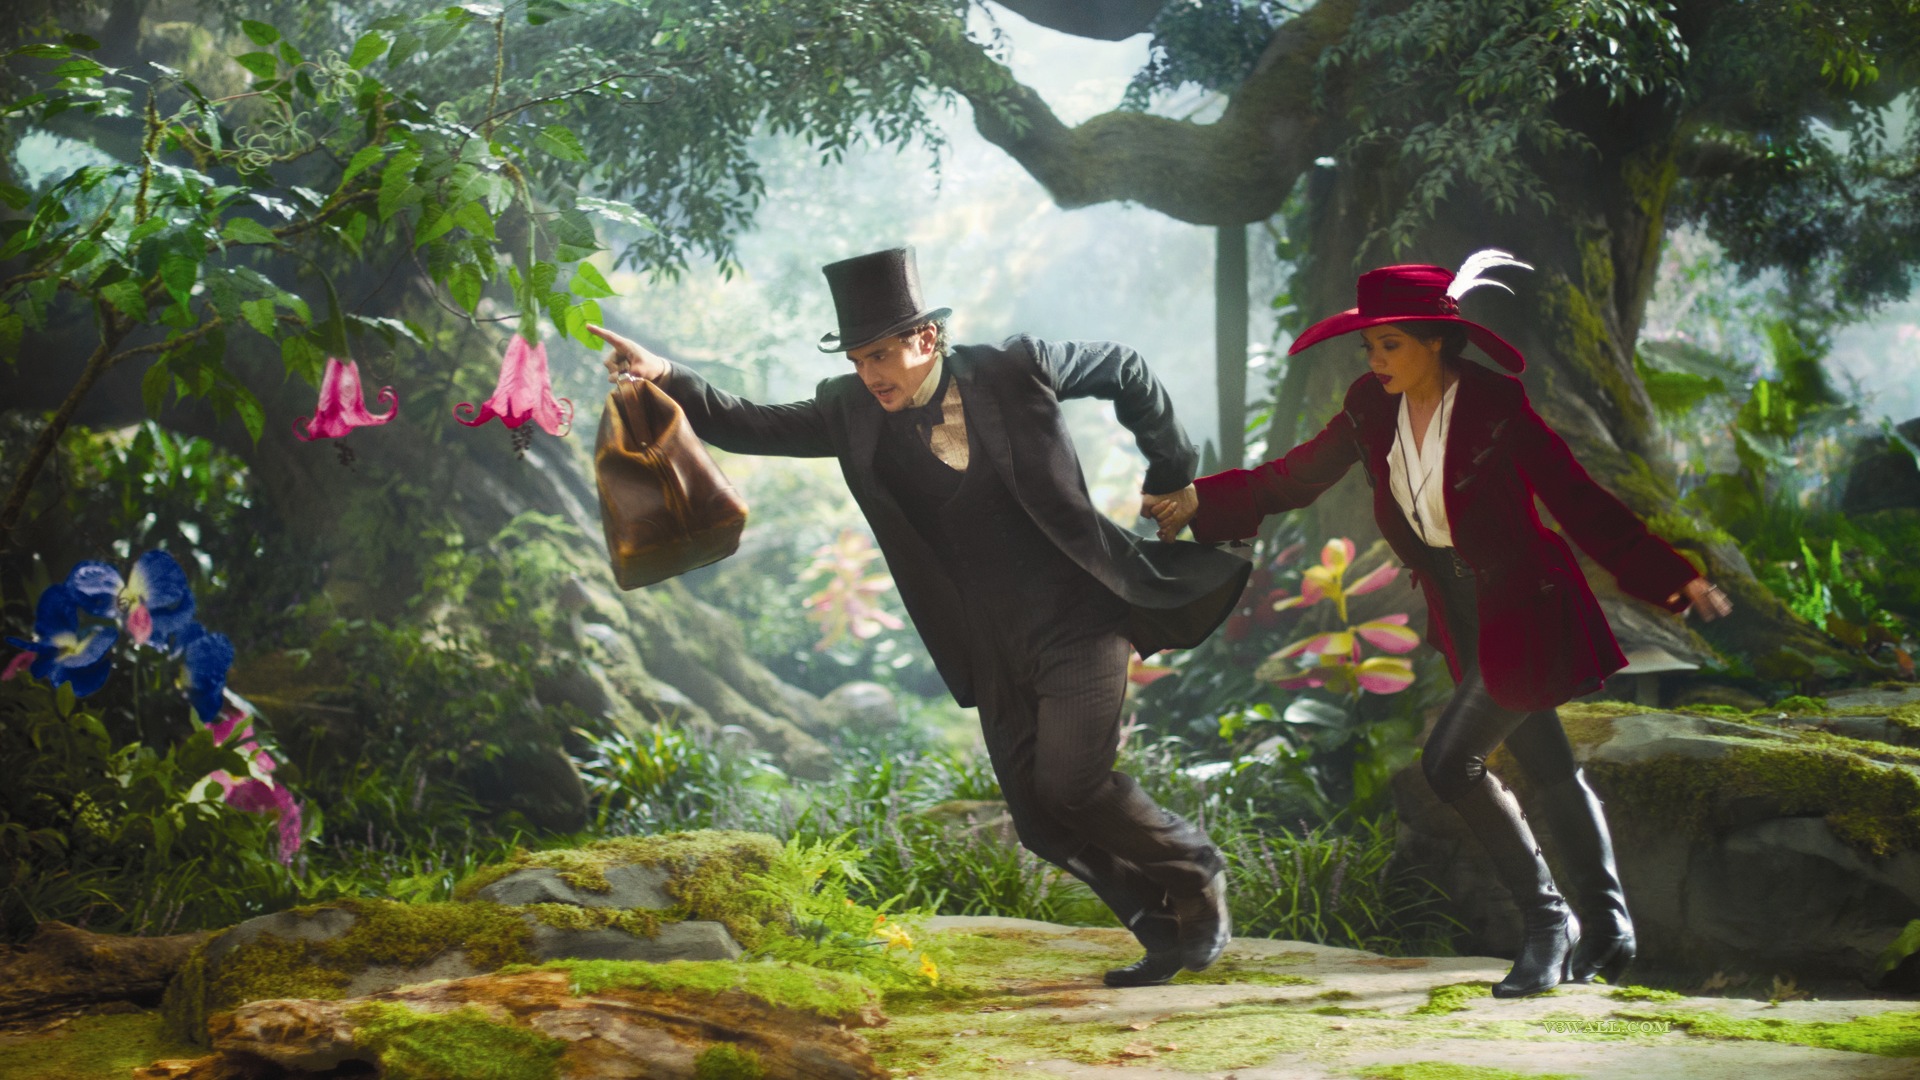 Oz The Great and Powerful 2013 HD wallpapers #19 - 1920x1080